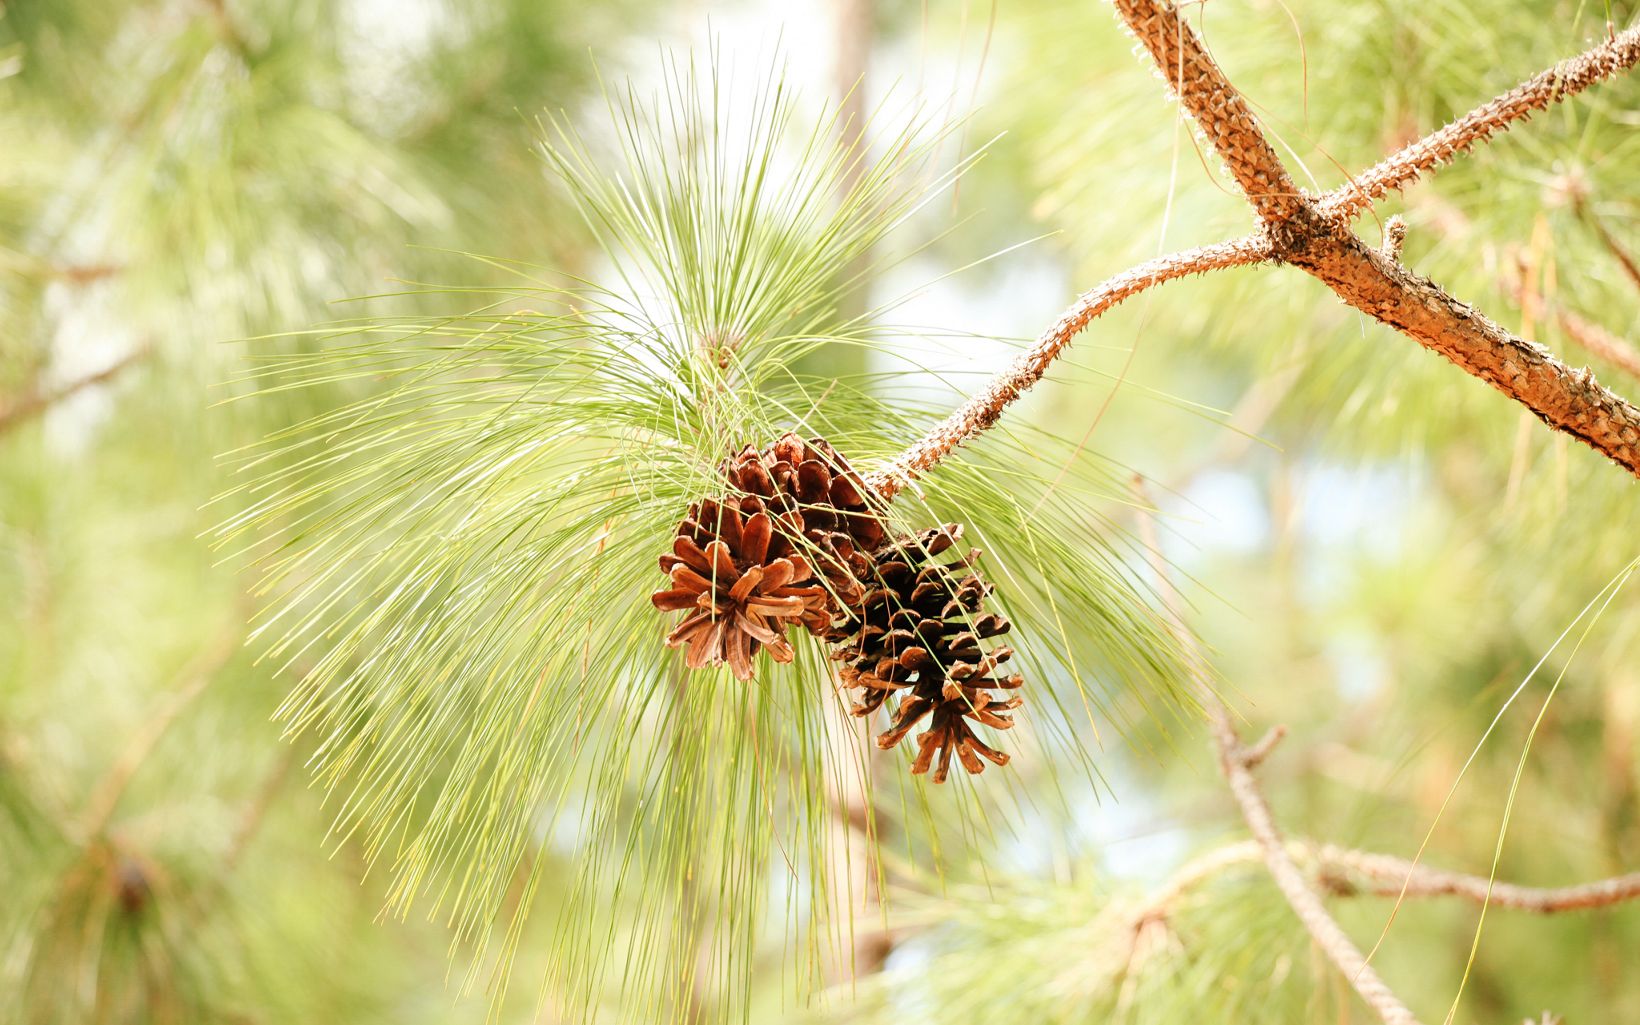 A longleaf pine branch with bright green needles and a cluster of three small, brown pinecones.